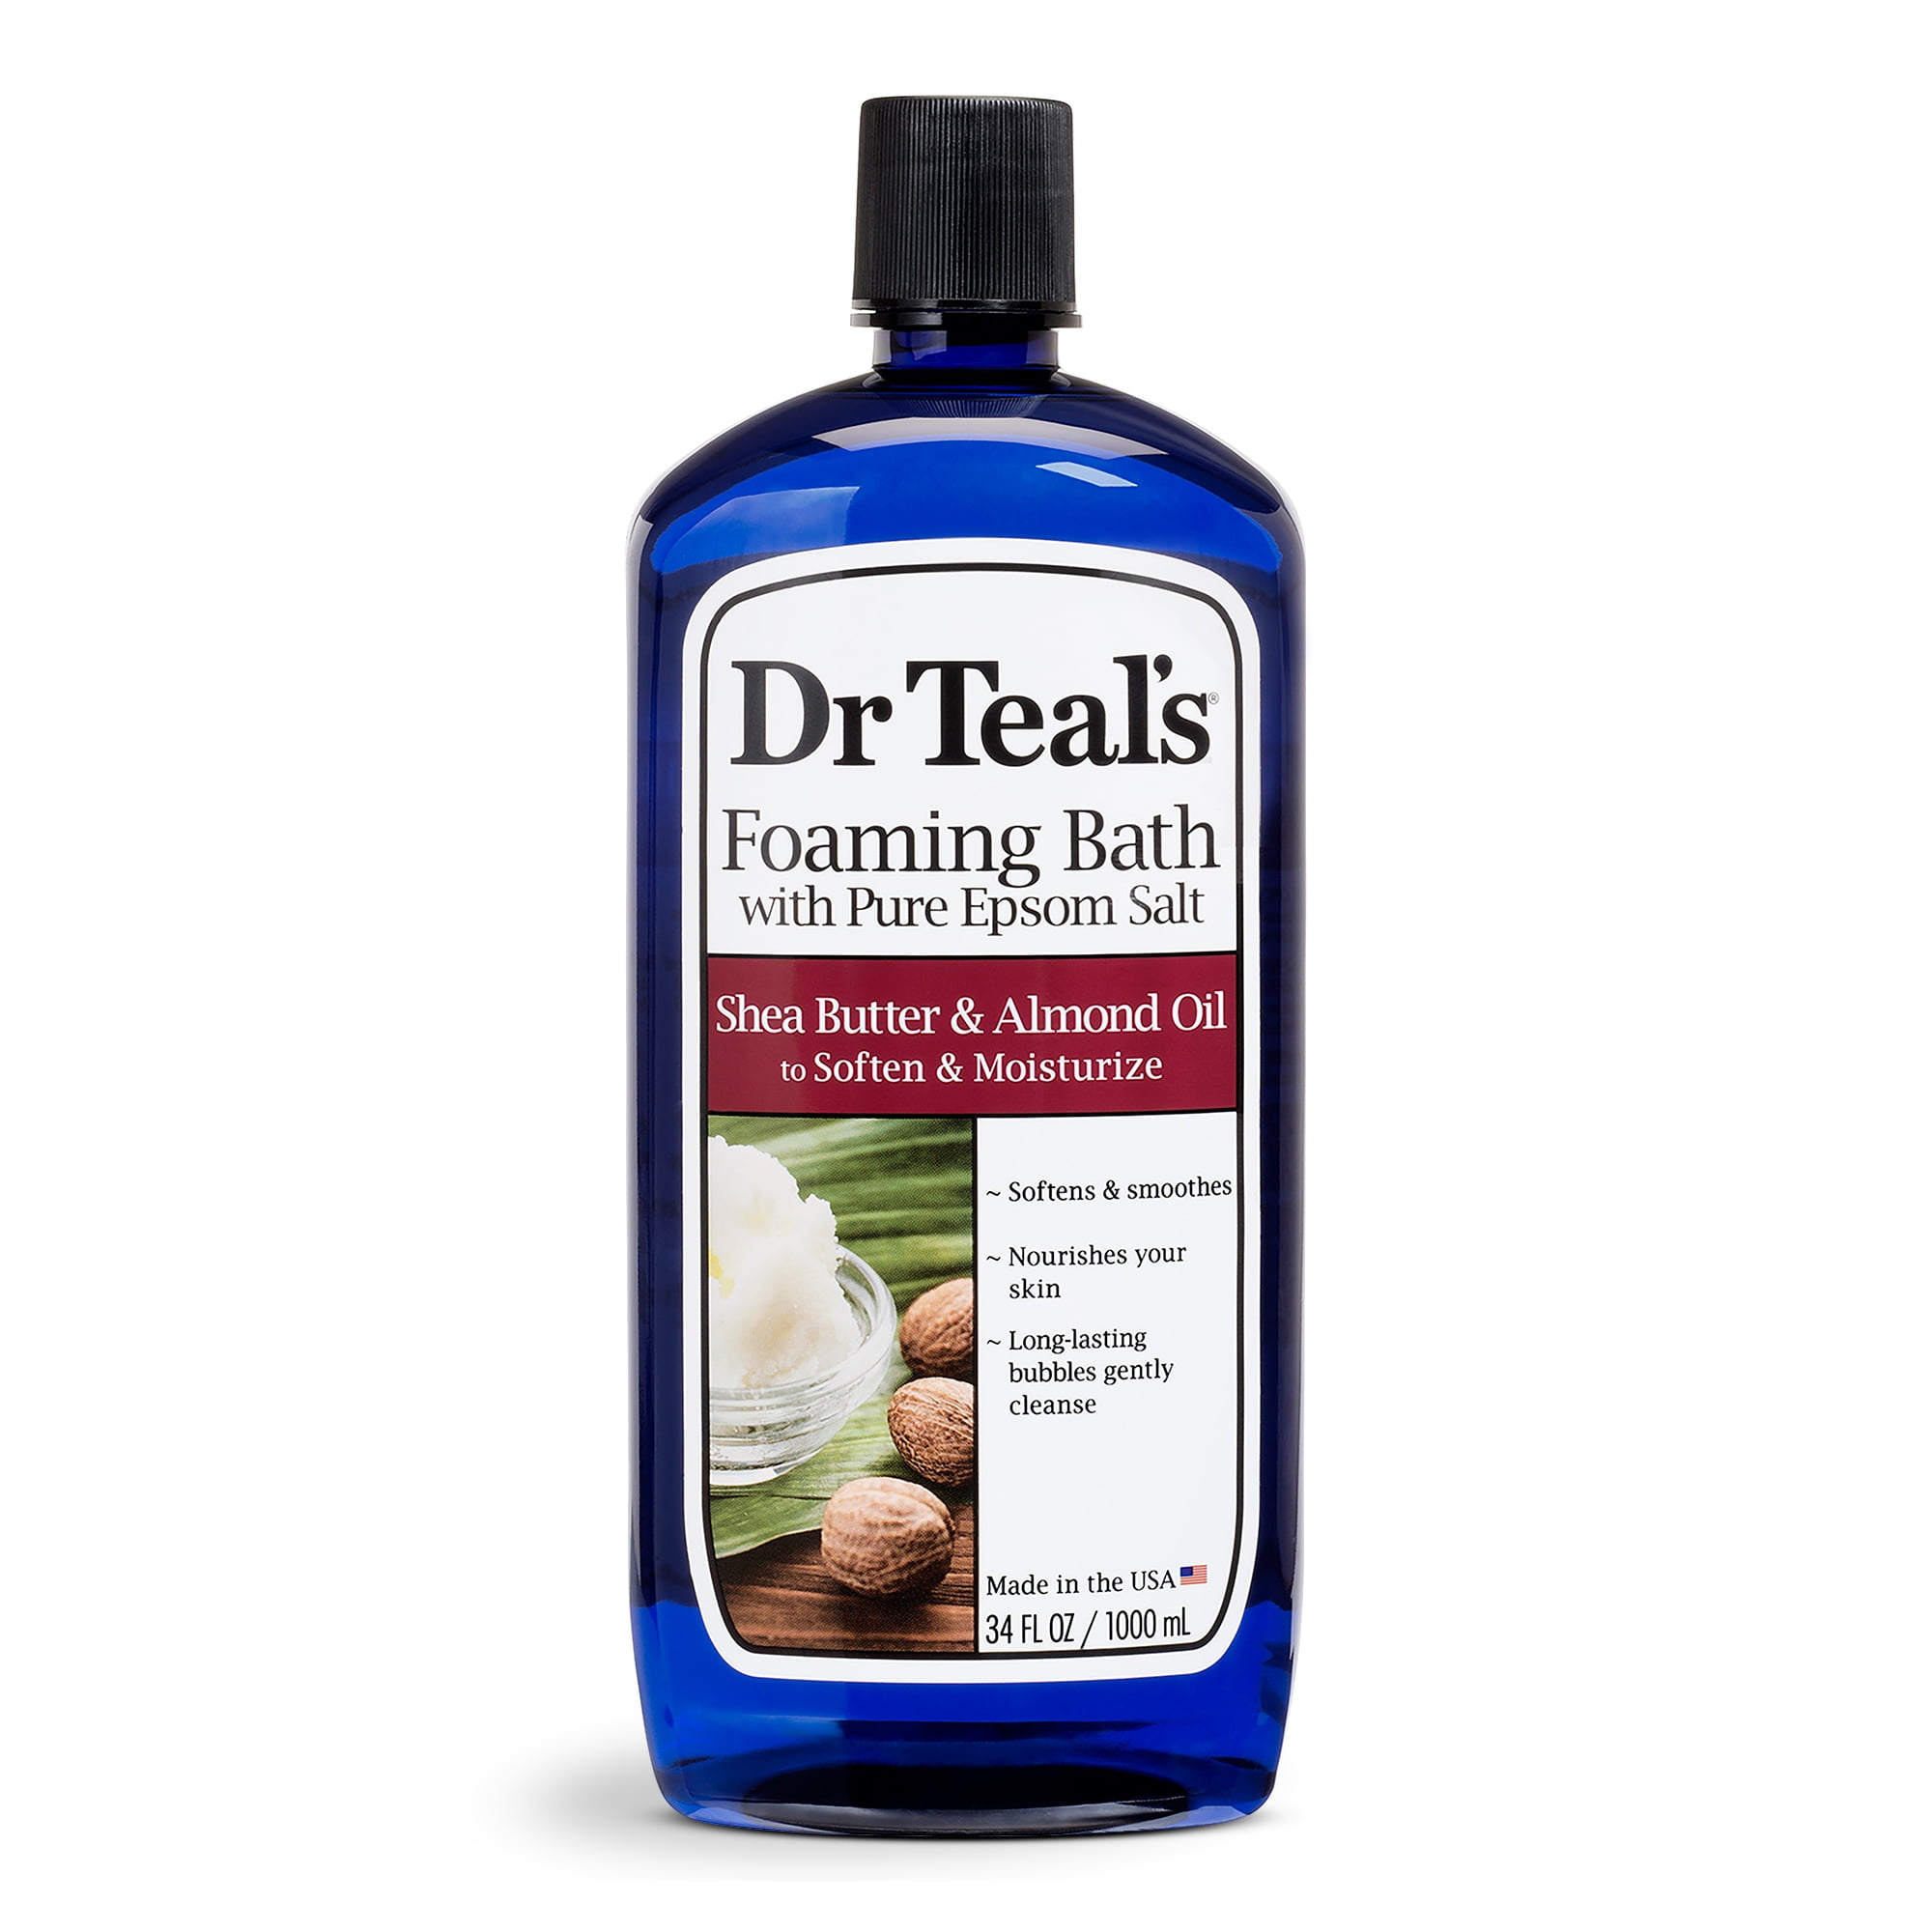 Dr Teal's Foaming Bath with Pure Epsom Salt,  Soften & Moisturize with Shea Butter & Almond Oil, 34 fl oz.